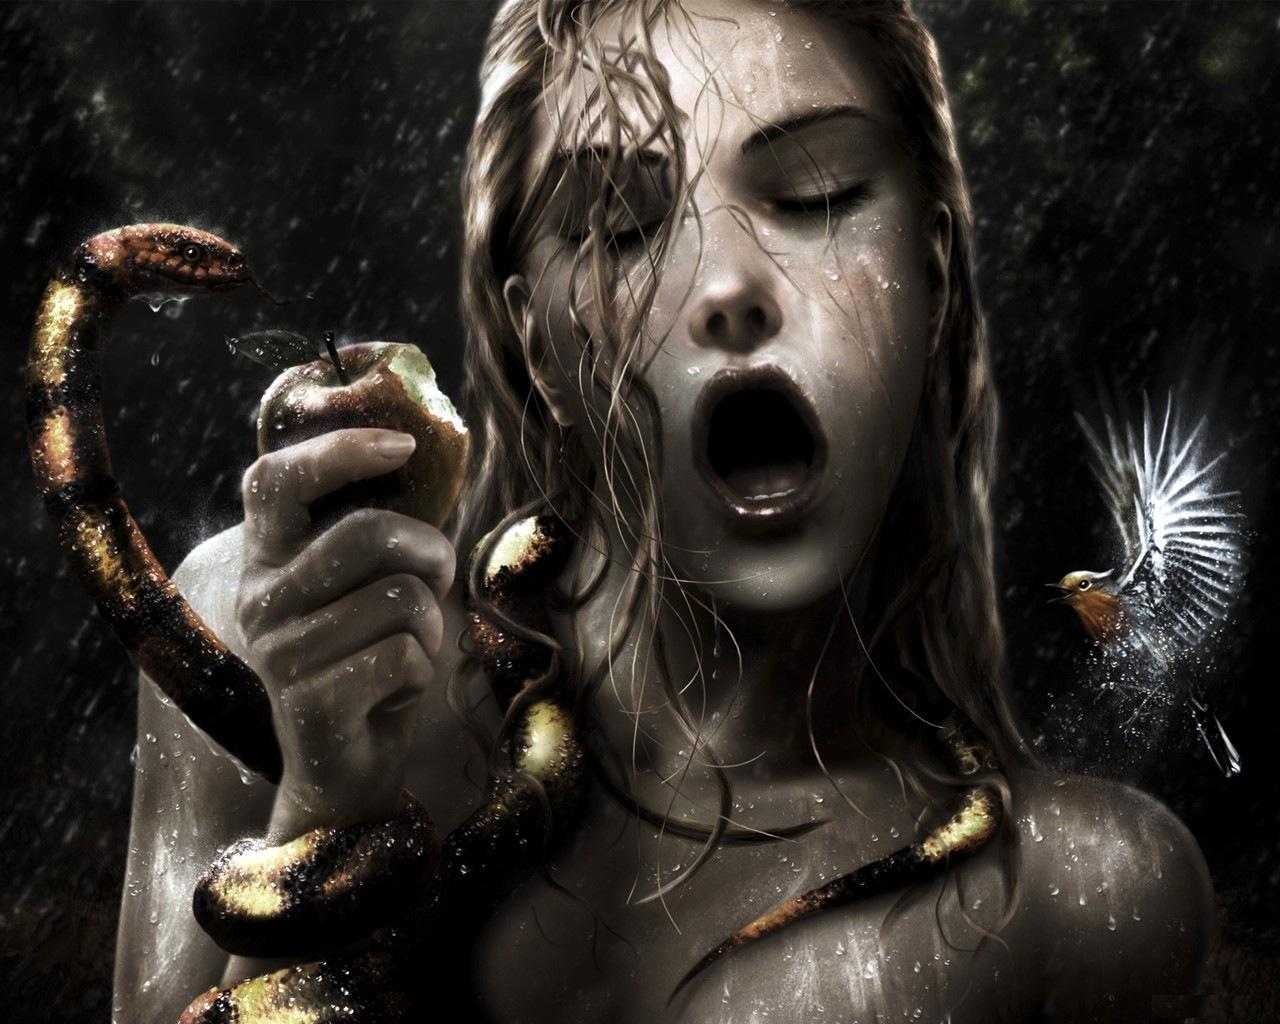 Scary black themed horror wallpapers 1 Design Utopia Trend 1280x1024